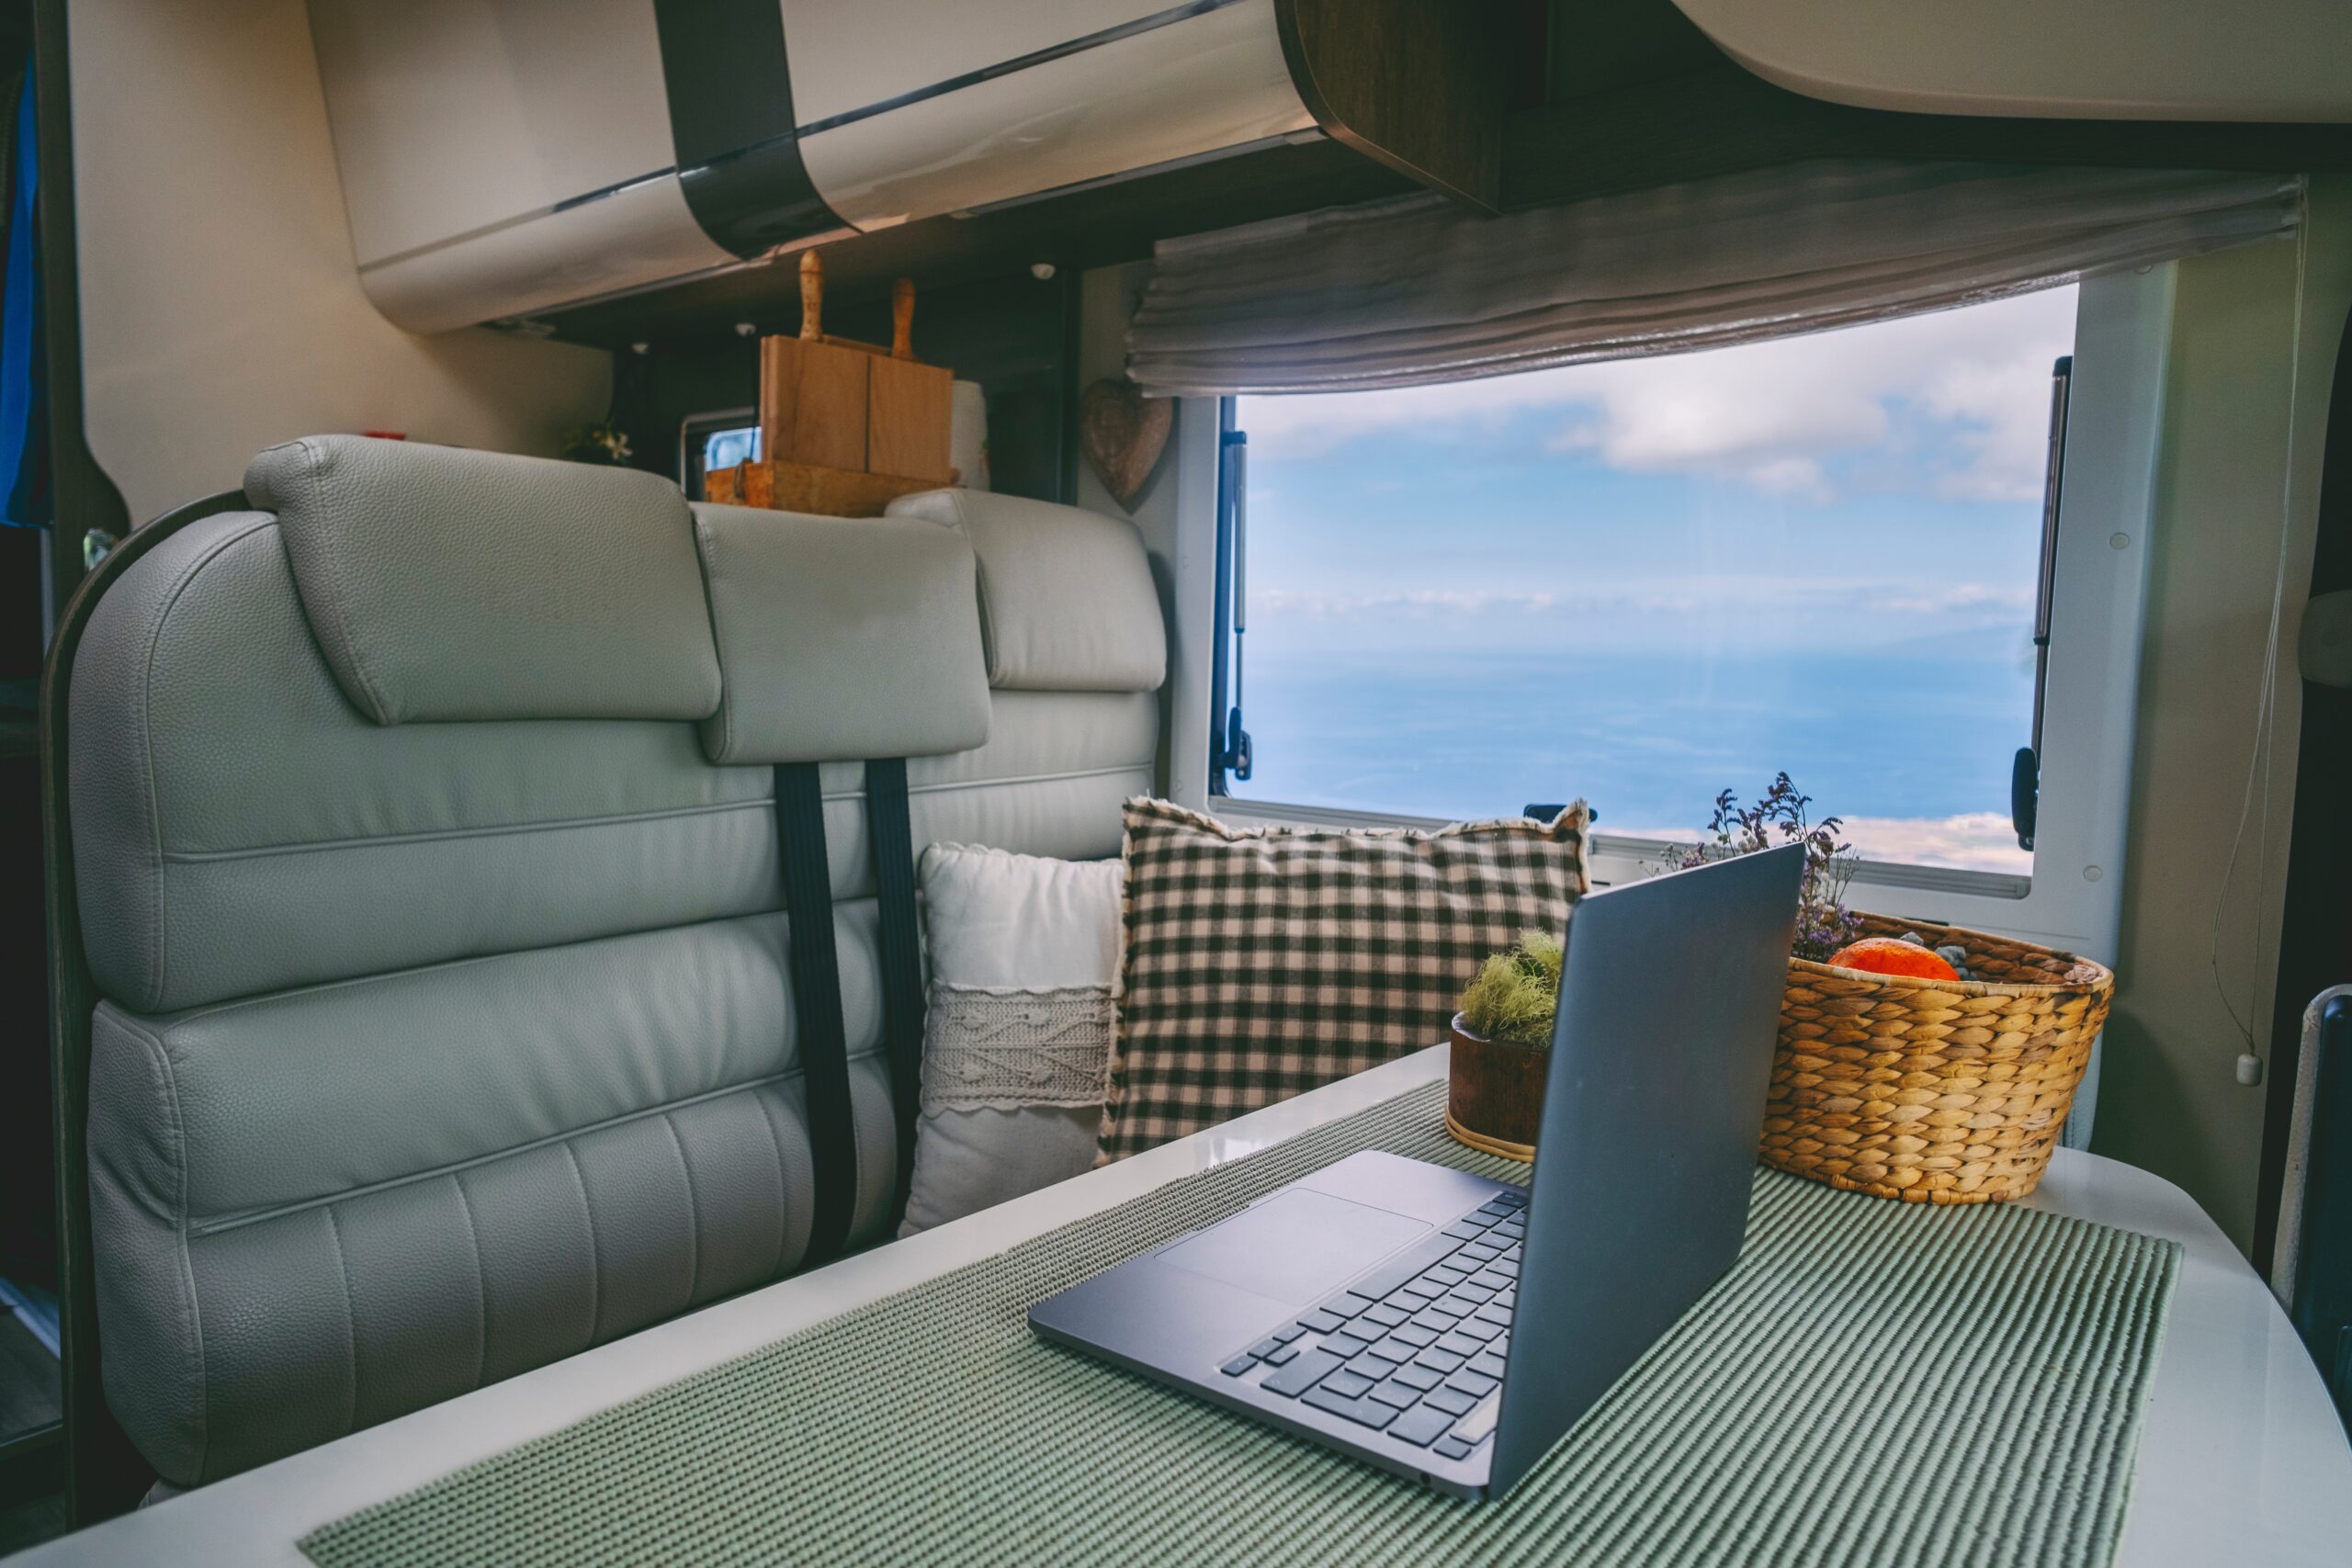 computer in an RV - feature for RV park internet solutions